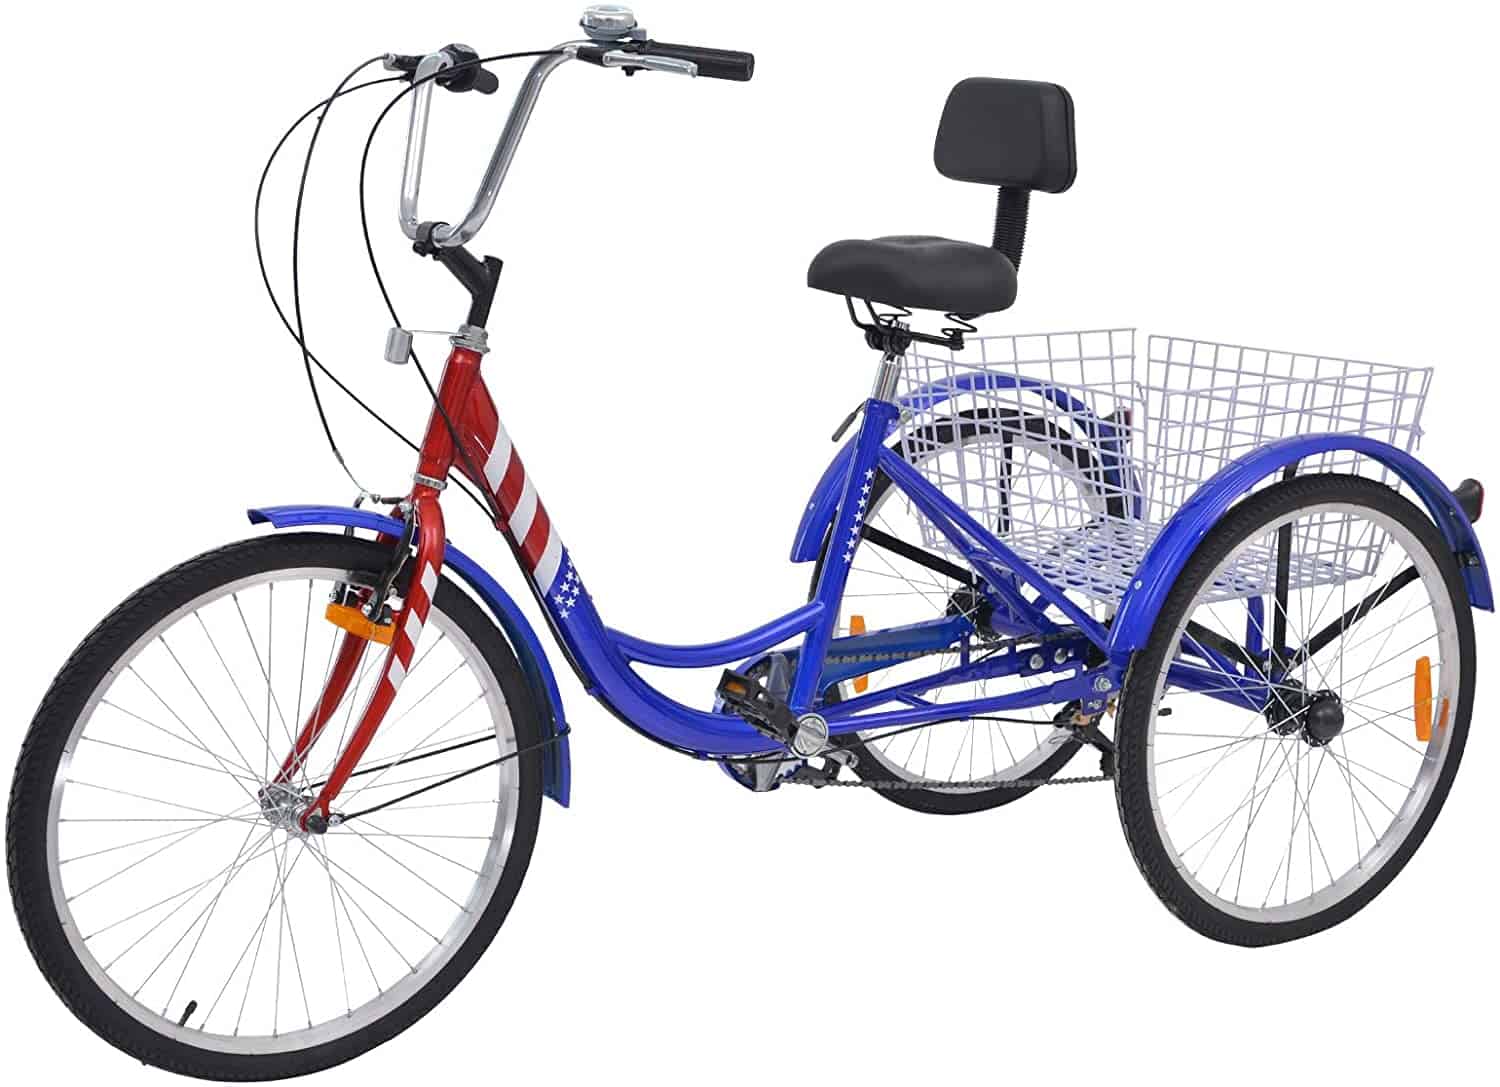 MOPHOTO Tricycles Cruiser Review